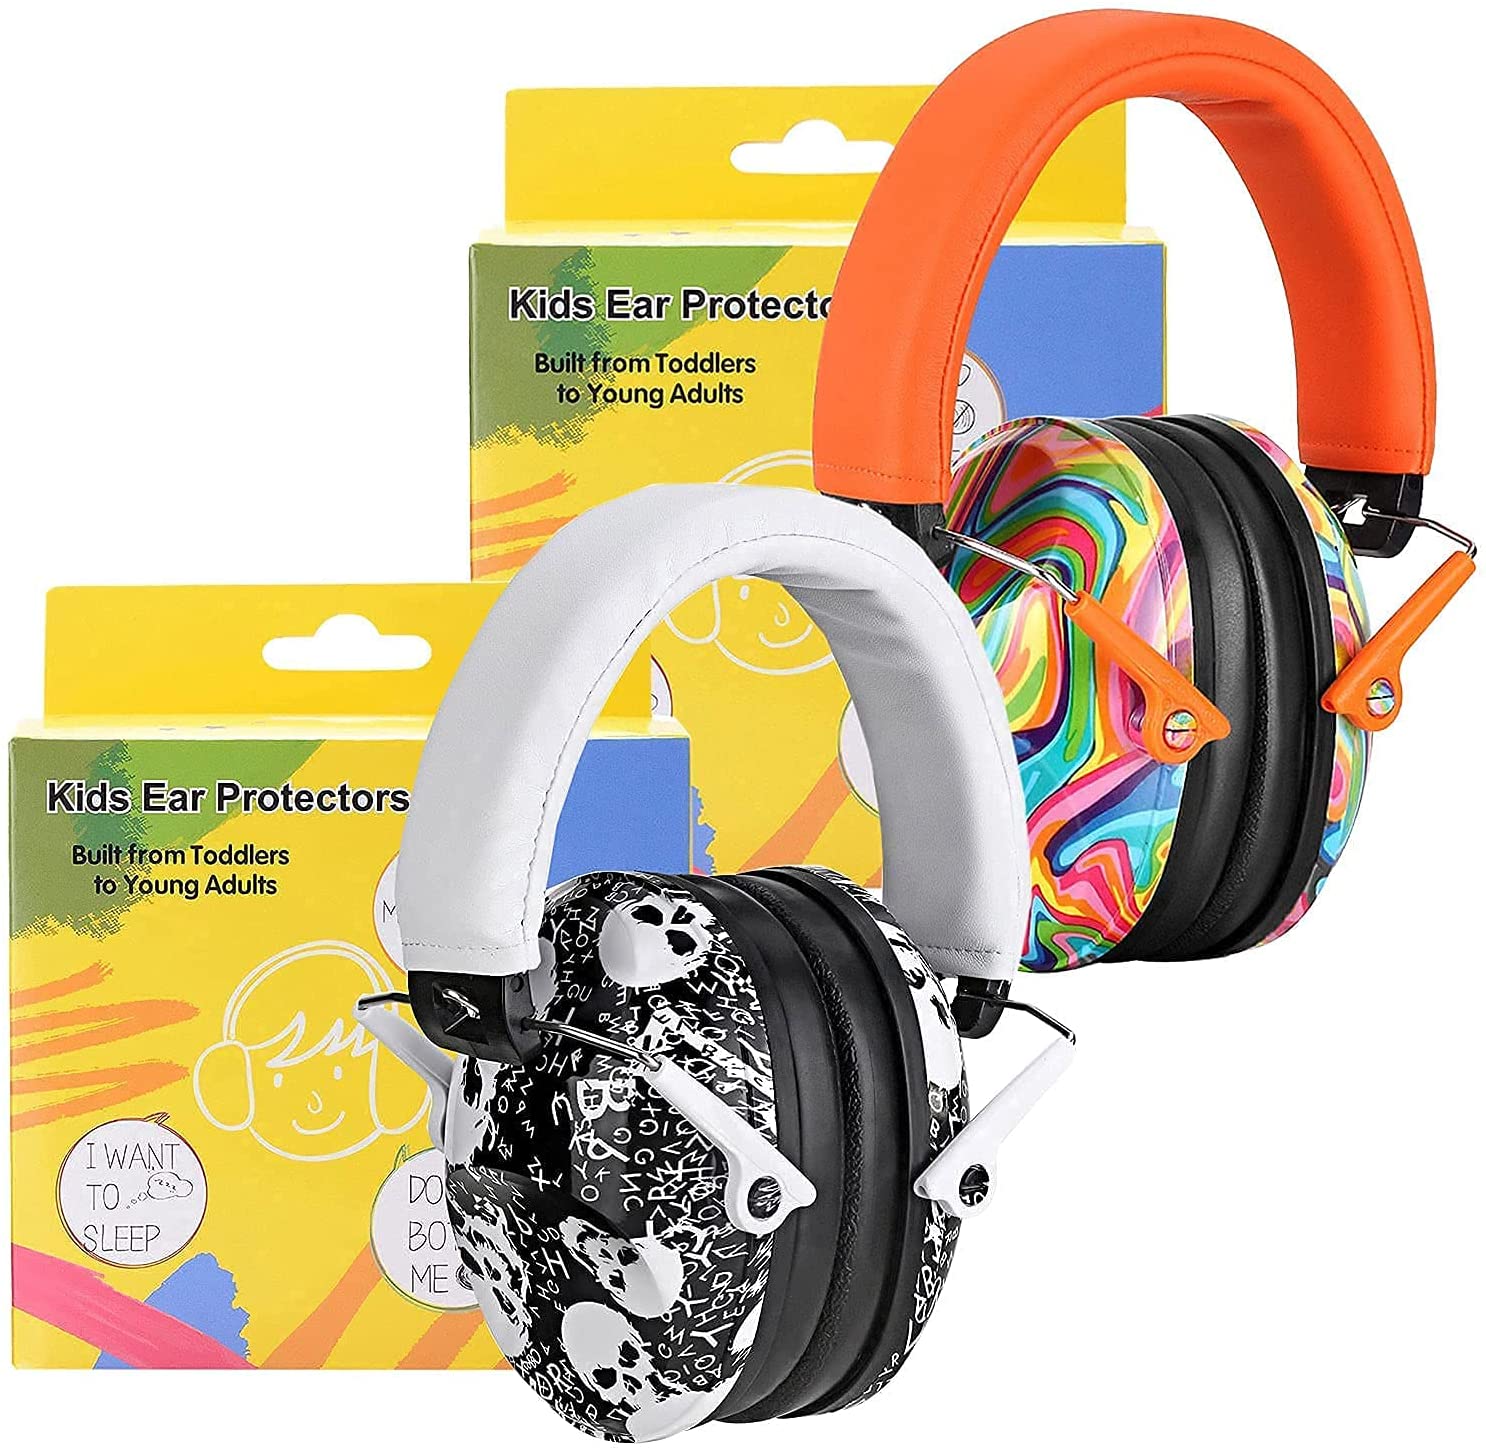 032 Kids Ear Protection Pack Earmuffs Lollipop  Skull Pattern, NRR 25dB Noise  Reduction Childrens Adjustable Hearing Protectors for Autism, Concerts,  Racing, Mowing, Studying, Sleeping